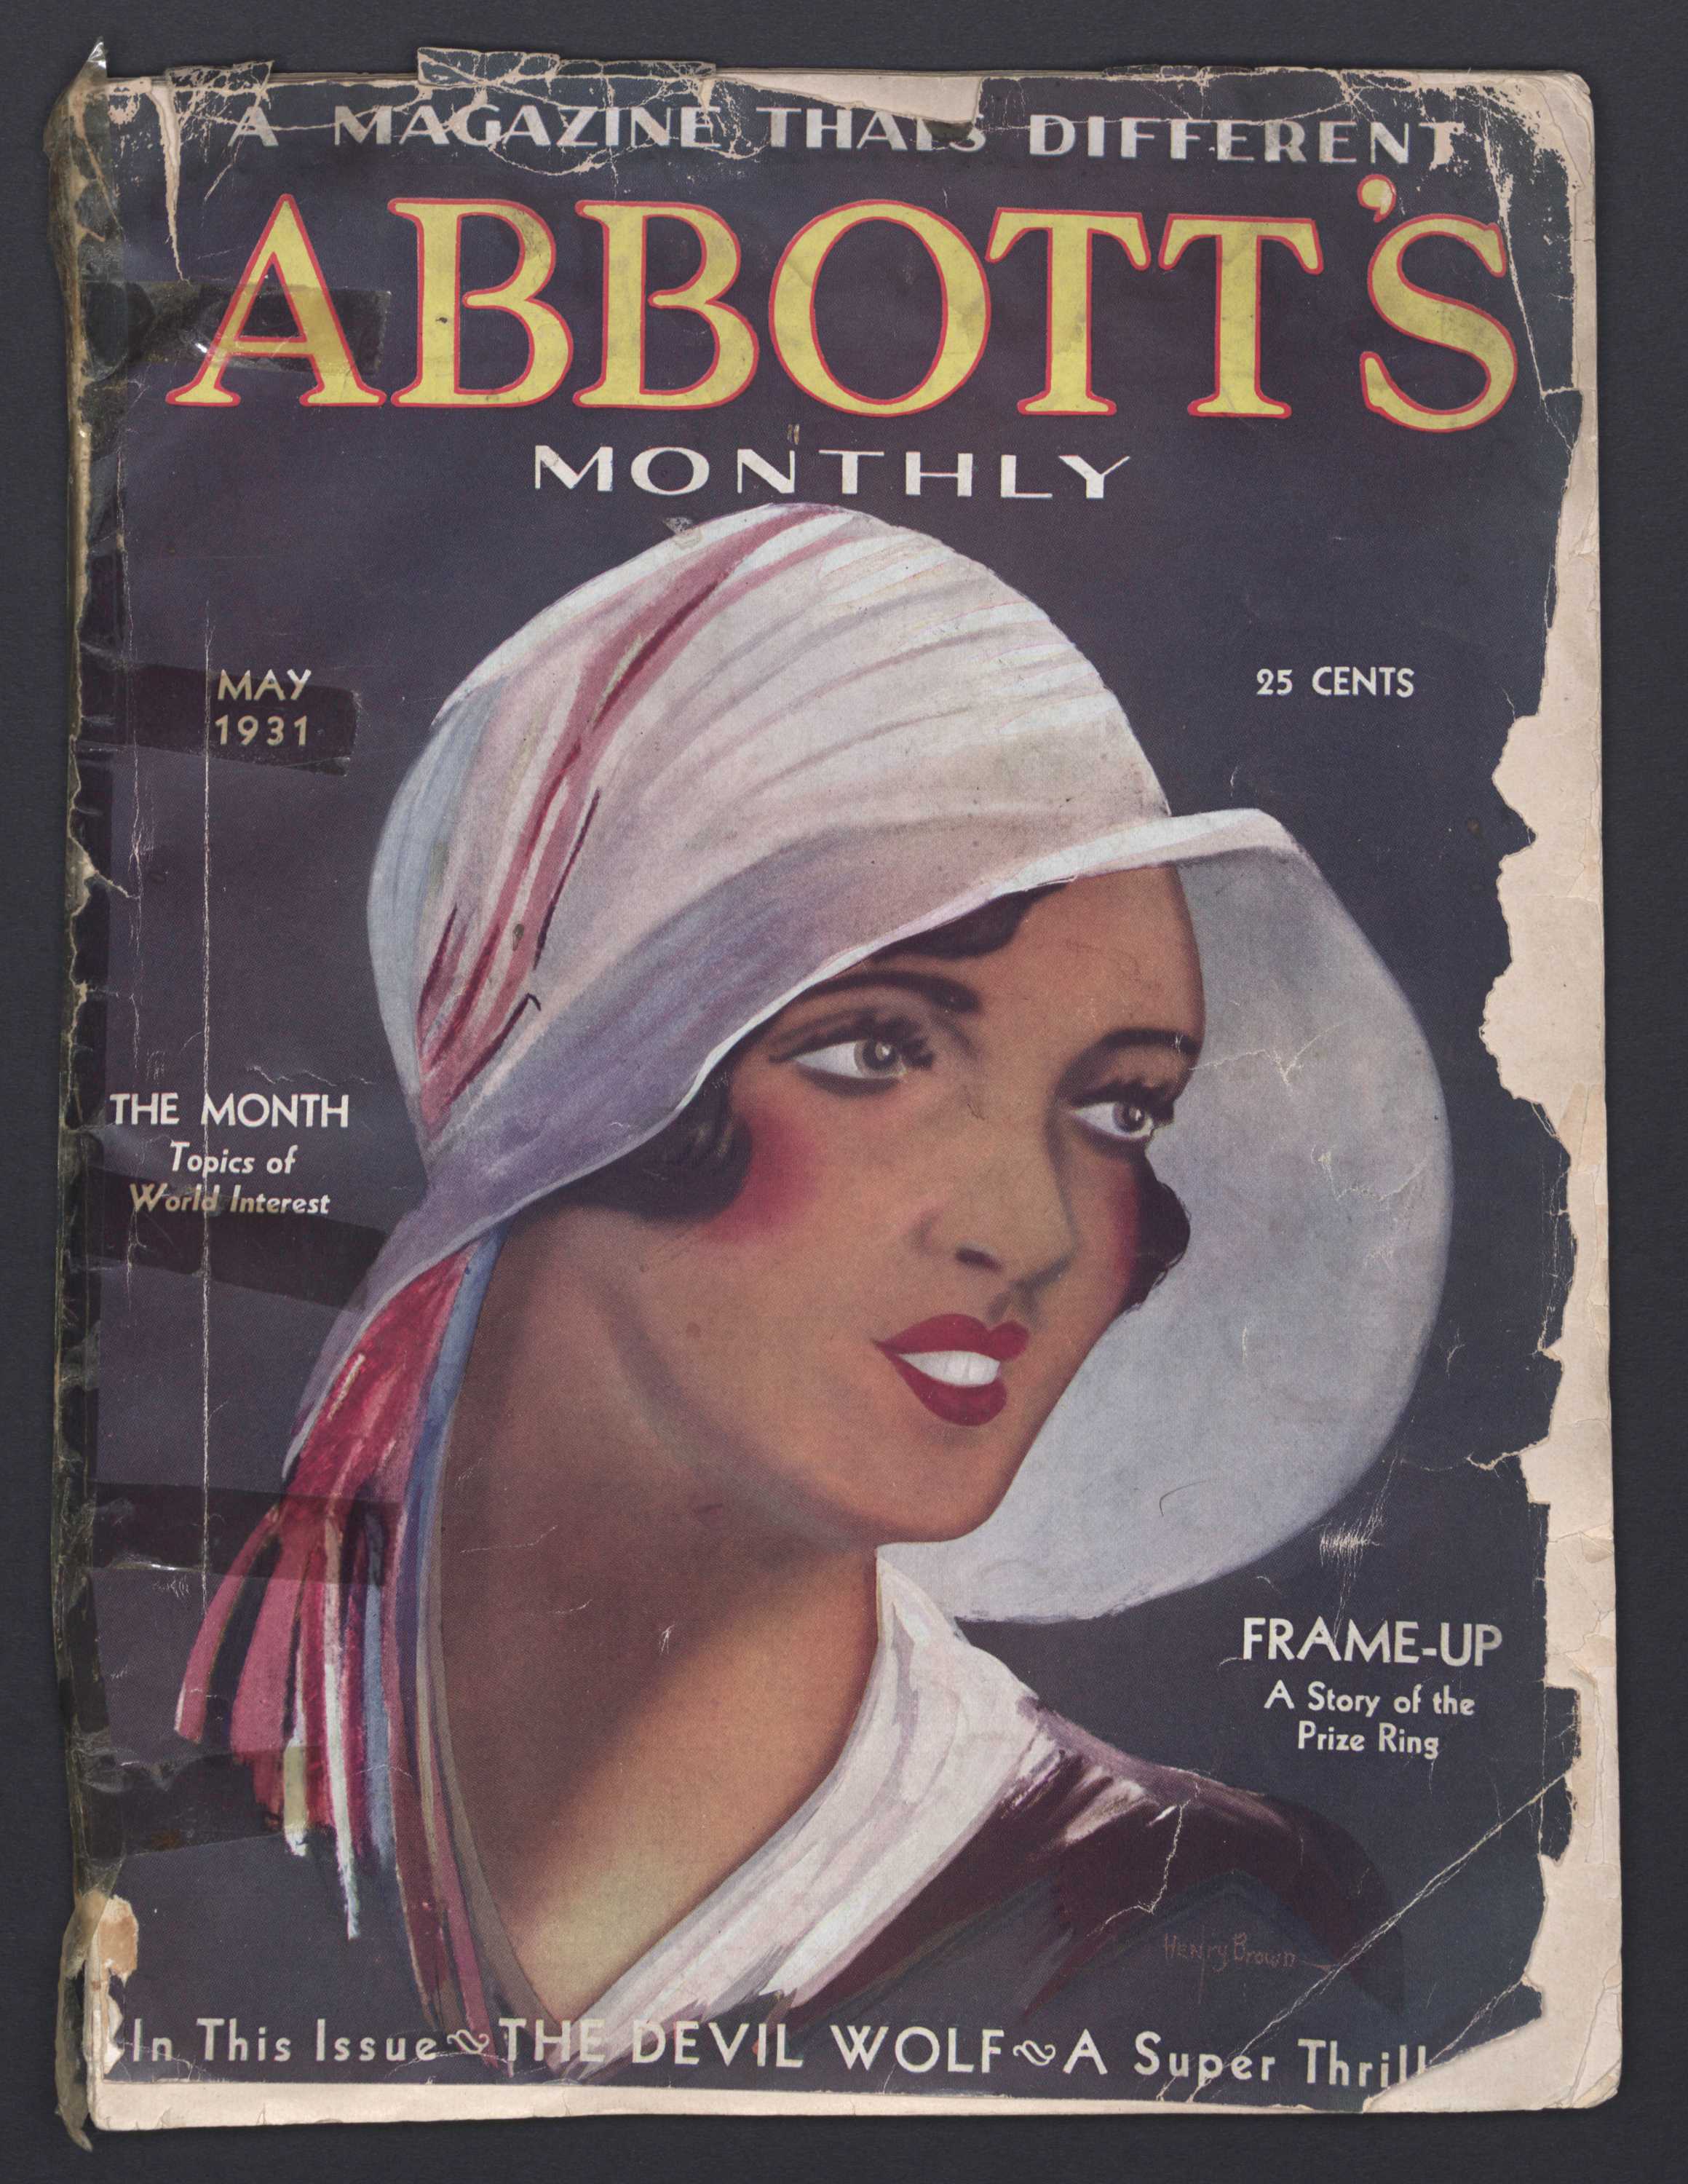 The May 1931 (Vol. II No. 5) issue of Abbott's Monthly.